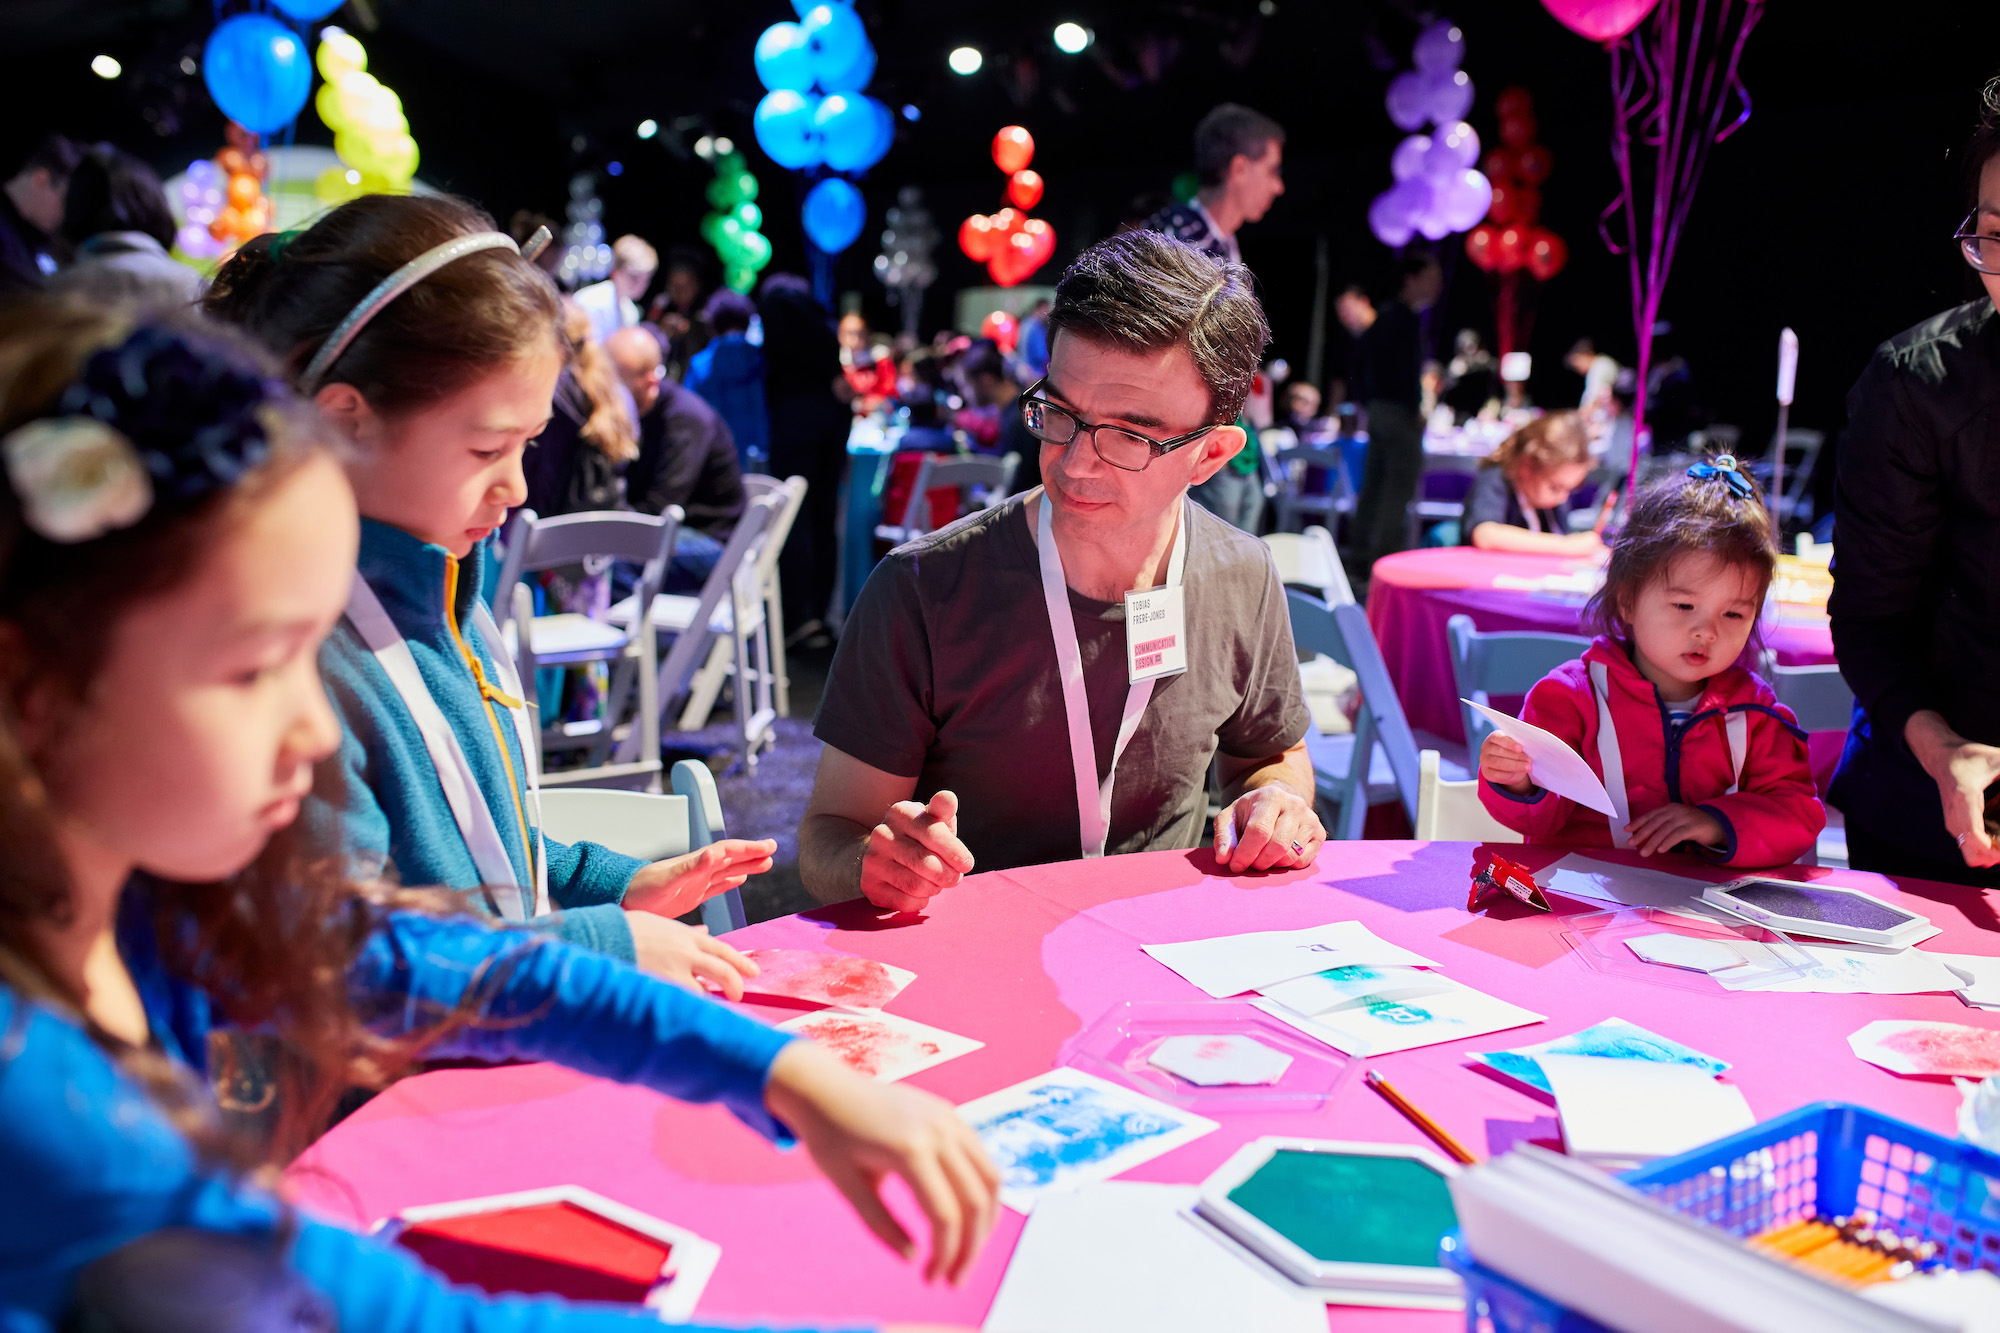 People gather at a table, in a festive room surrounded by balloons, creating postcards using bright colors.